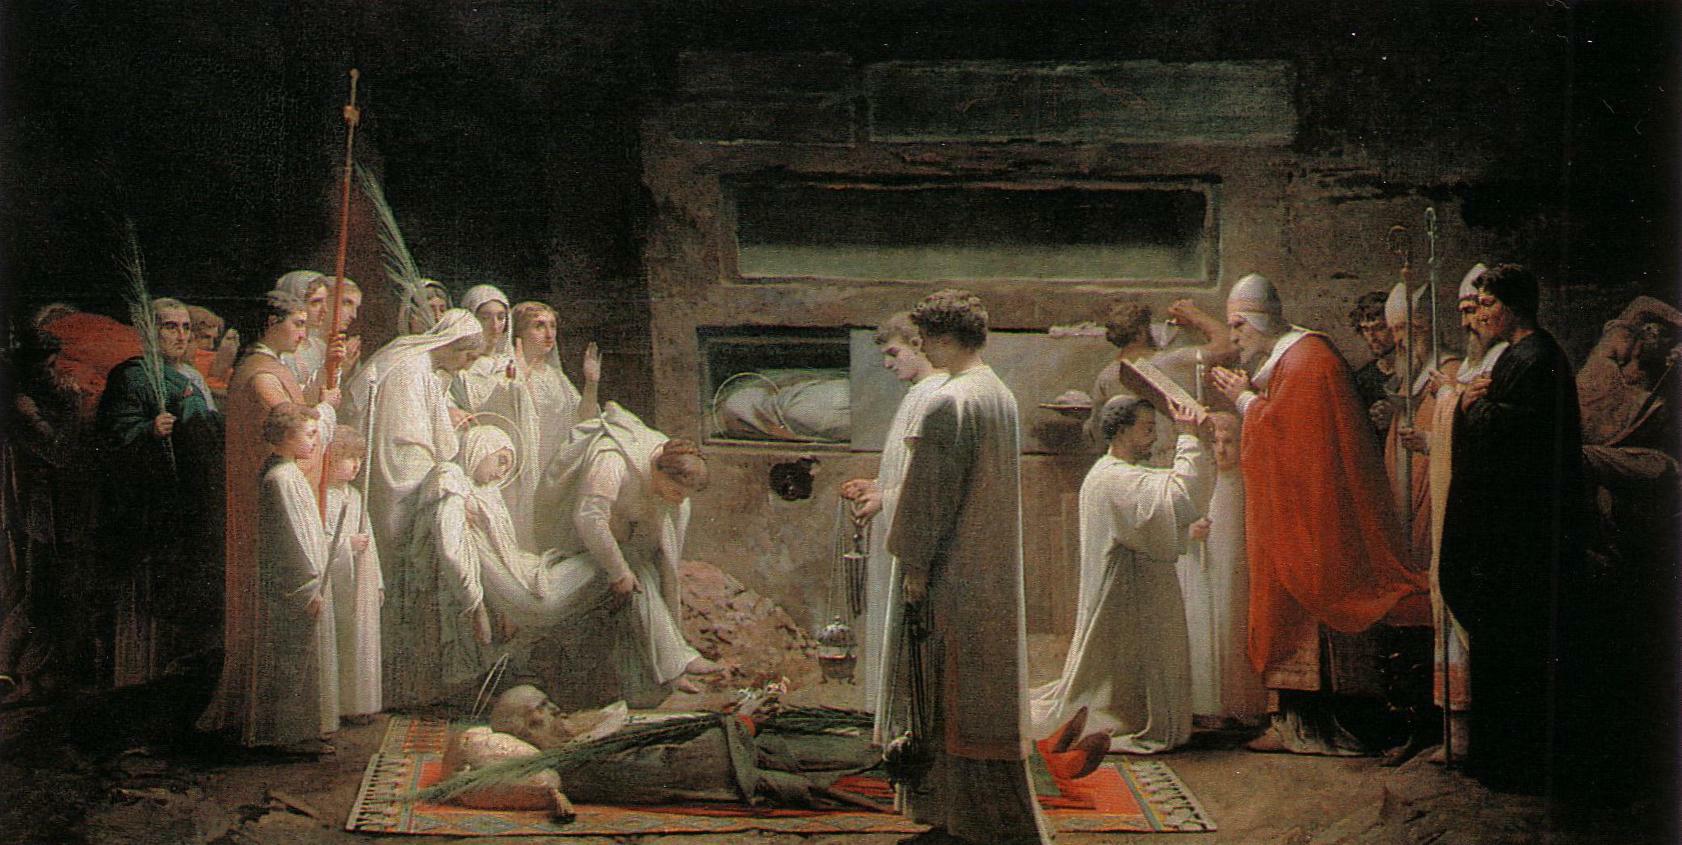 The Martyrs in the Catacombs by Jules Eugène Lenepveu, 1855 [Musée d'Orsay, Paris]